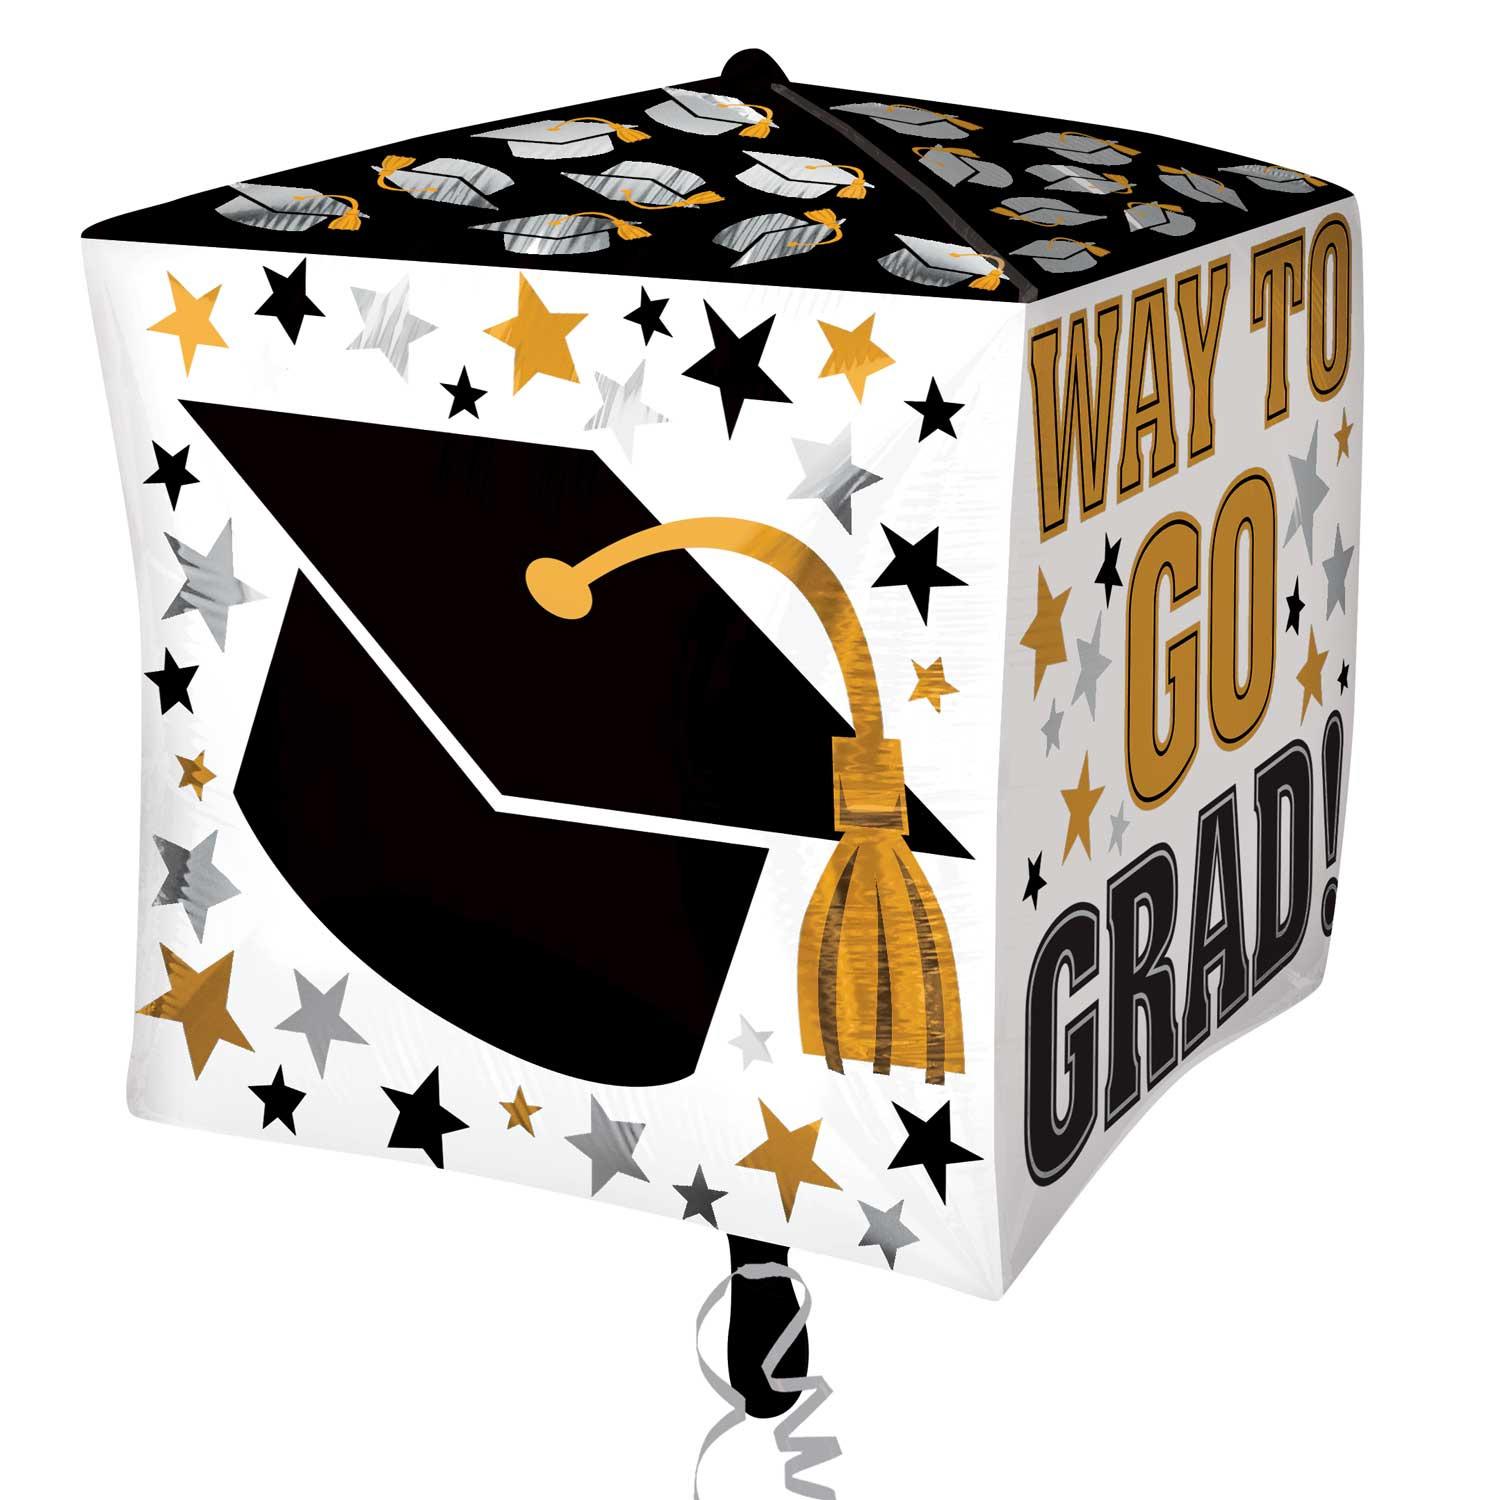 Way to Go Grad Gold & Black UltraShape Foil Balloon 15in Balloons & Streamers - Party Centre